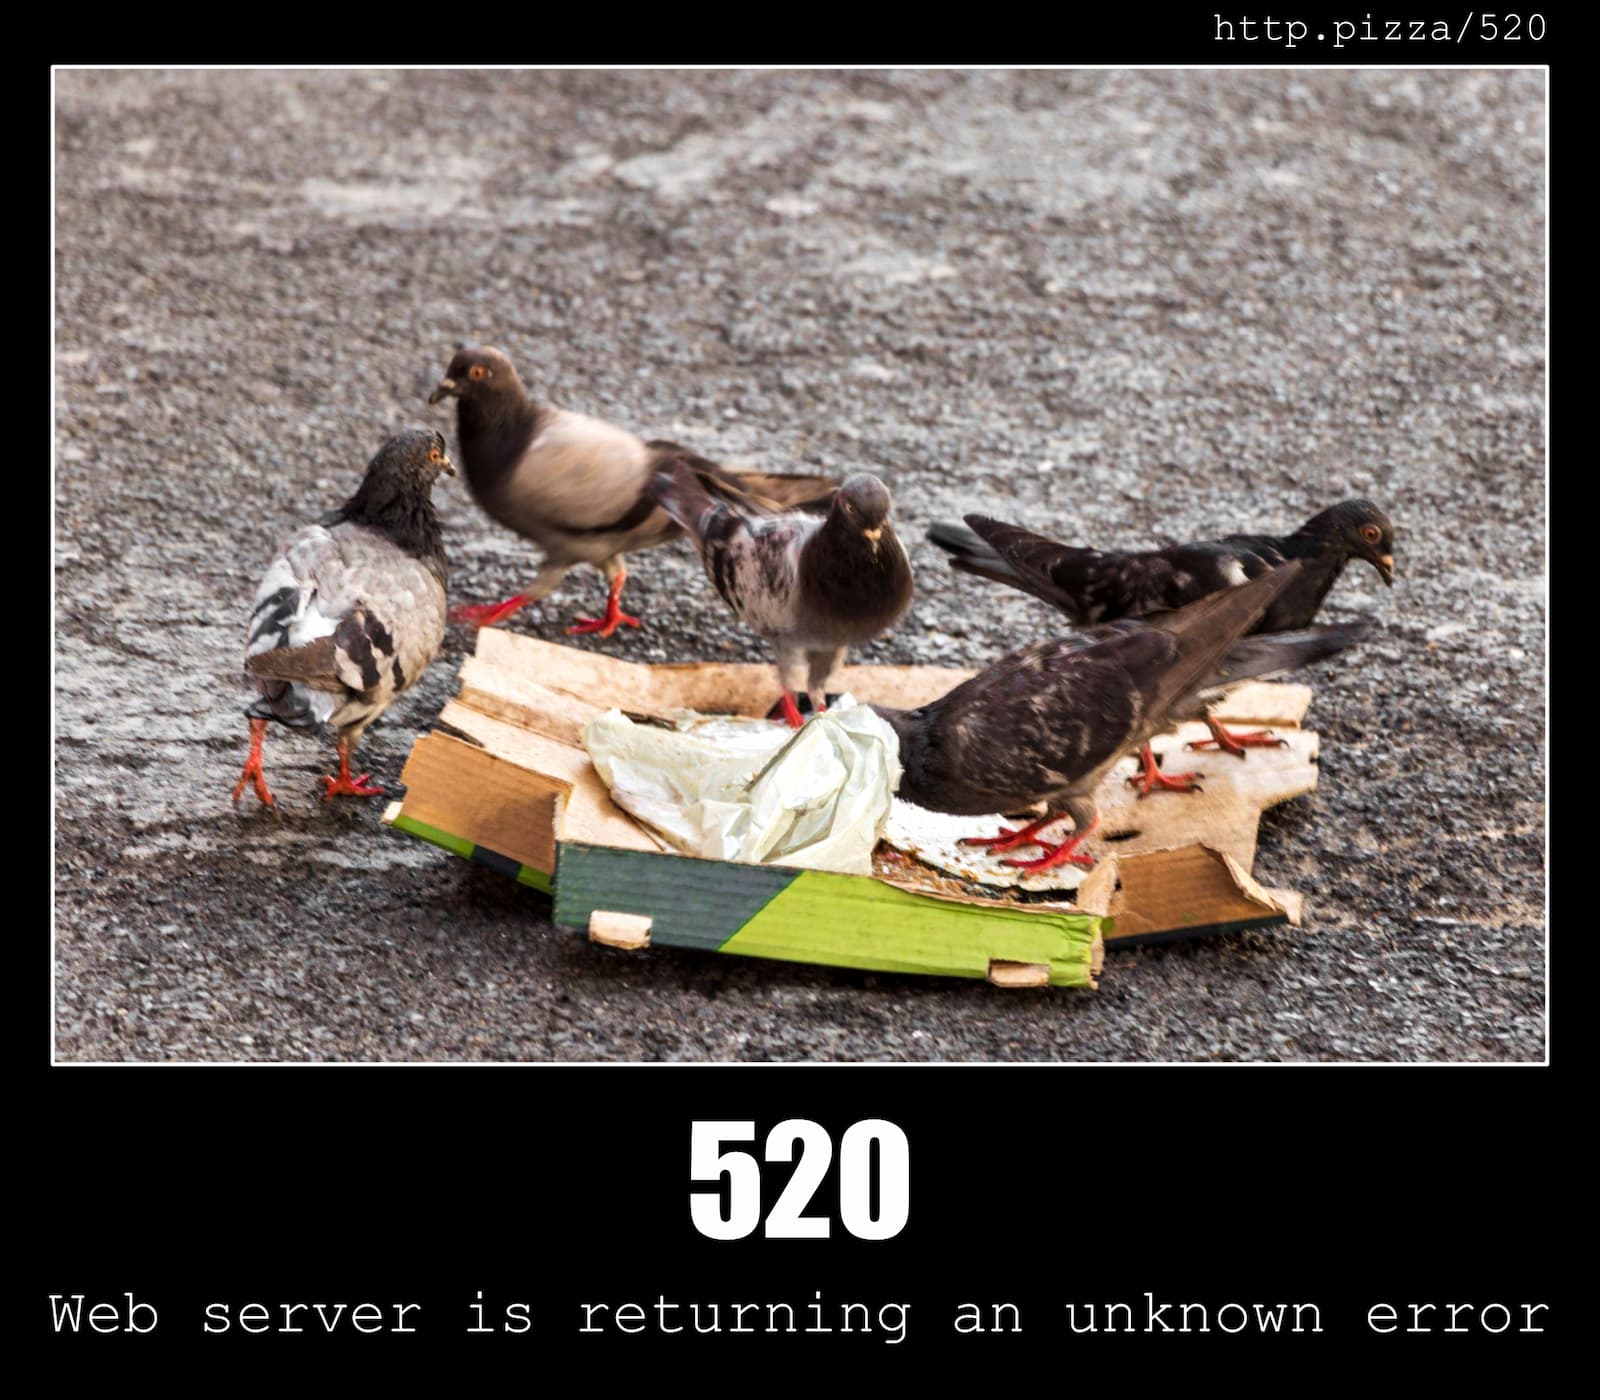 HTTP Status Code 520 Web server is returning an unknown error & Pizzas